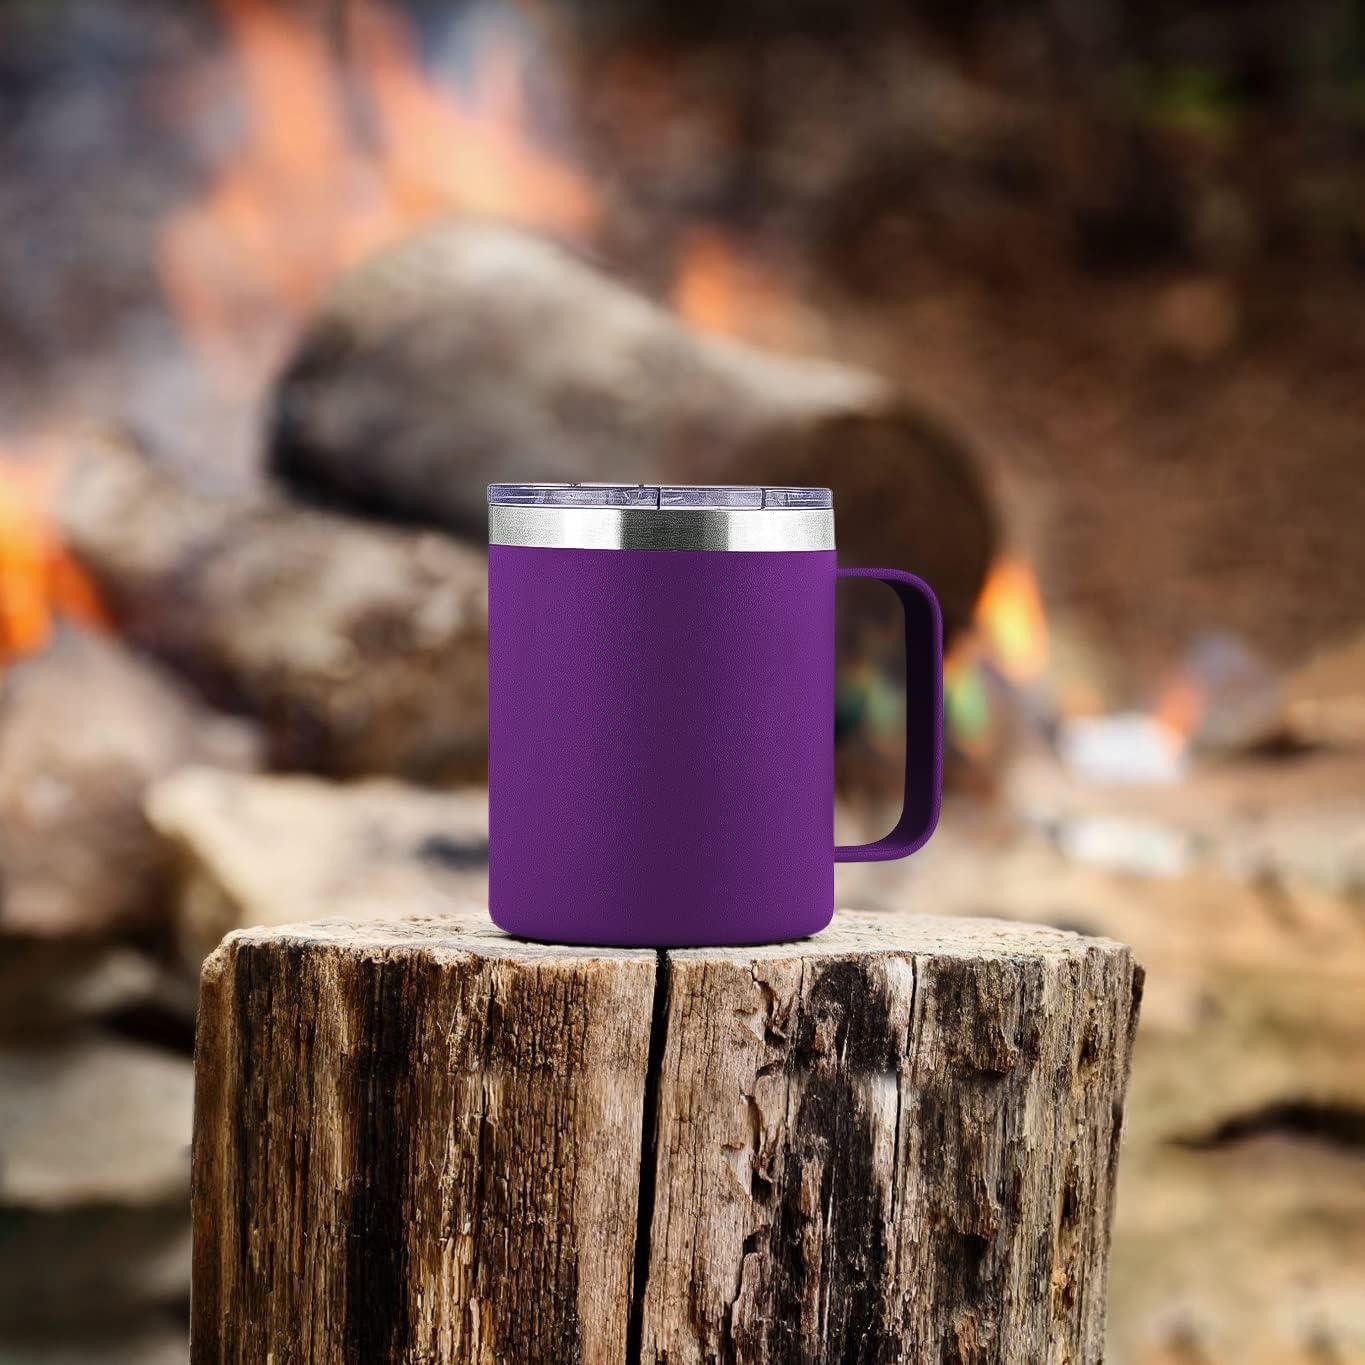 Zulay 12 oz Insulated Coffee Mug with Lid - Stainless Steel Camping Mug  Tumbler with Handle - Double…See more Zulay 12 oz Insulated Coffee Mug with